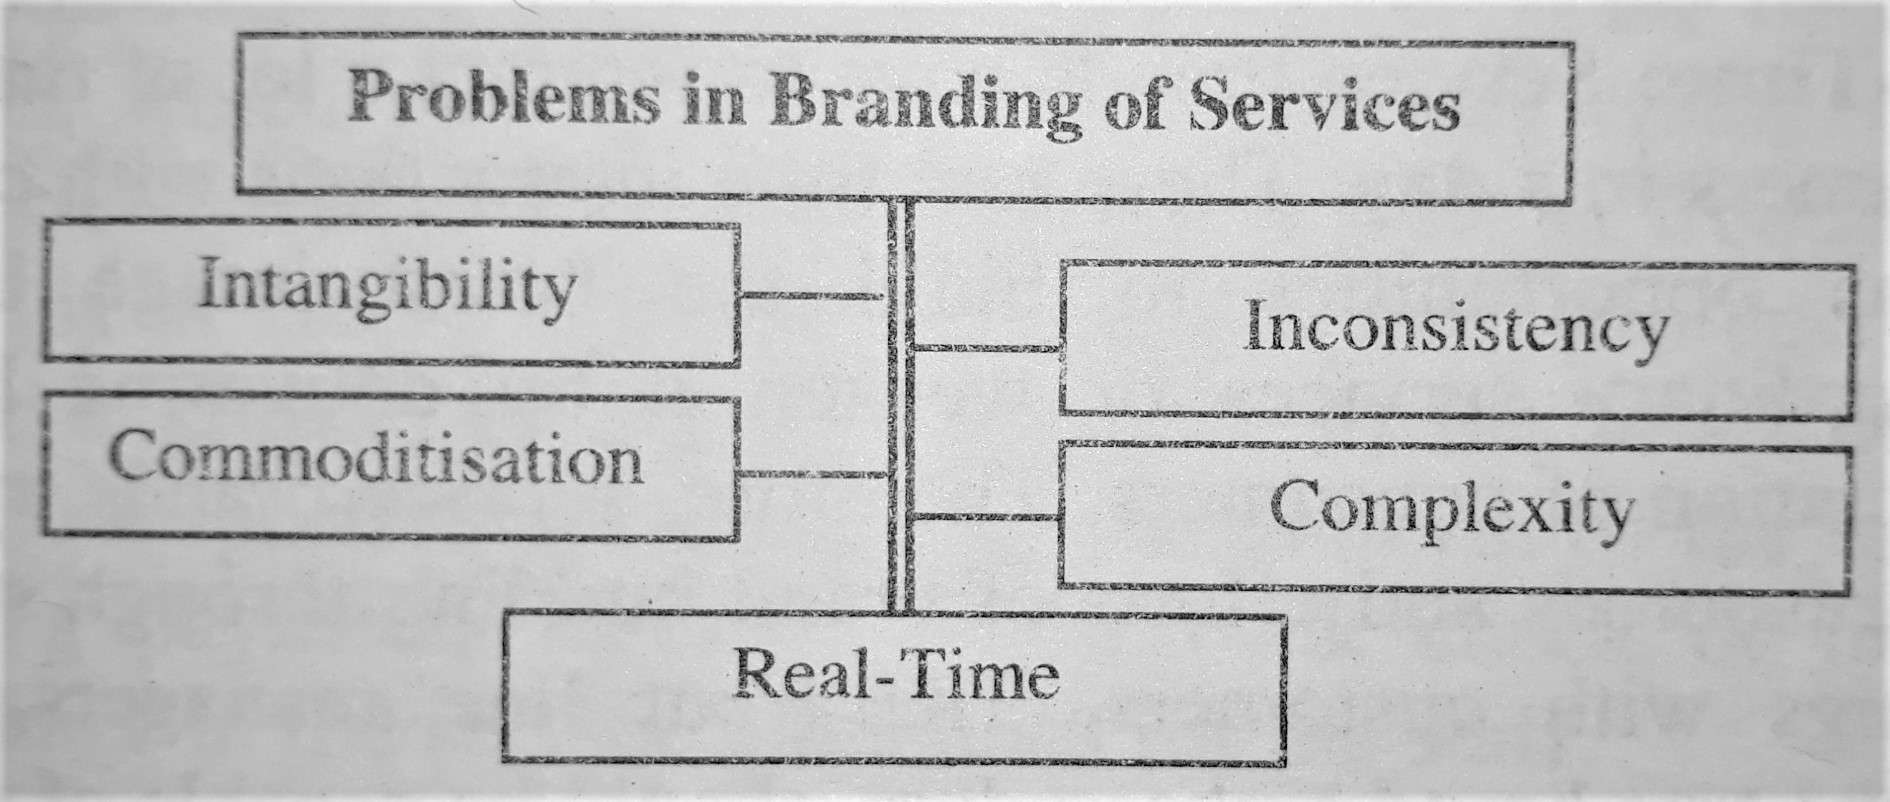 Problems in Branding of Services